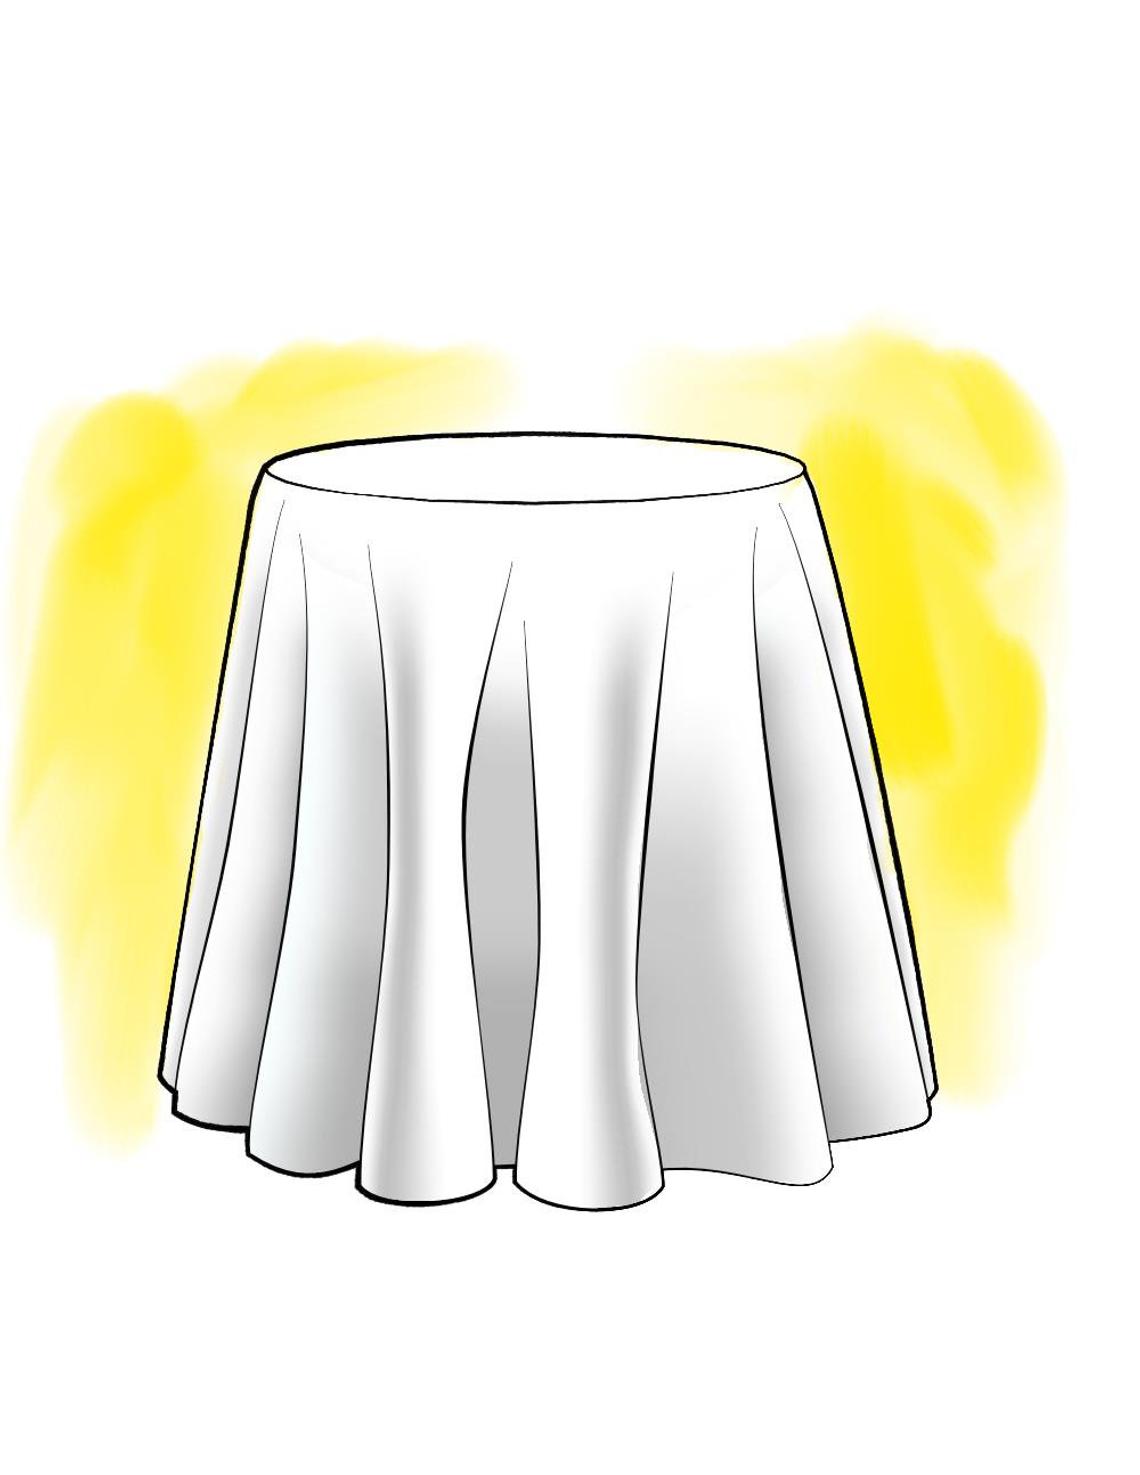 round tablecloth in classic black ticking stripe on white